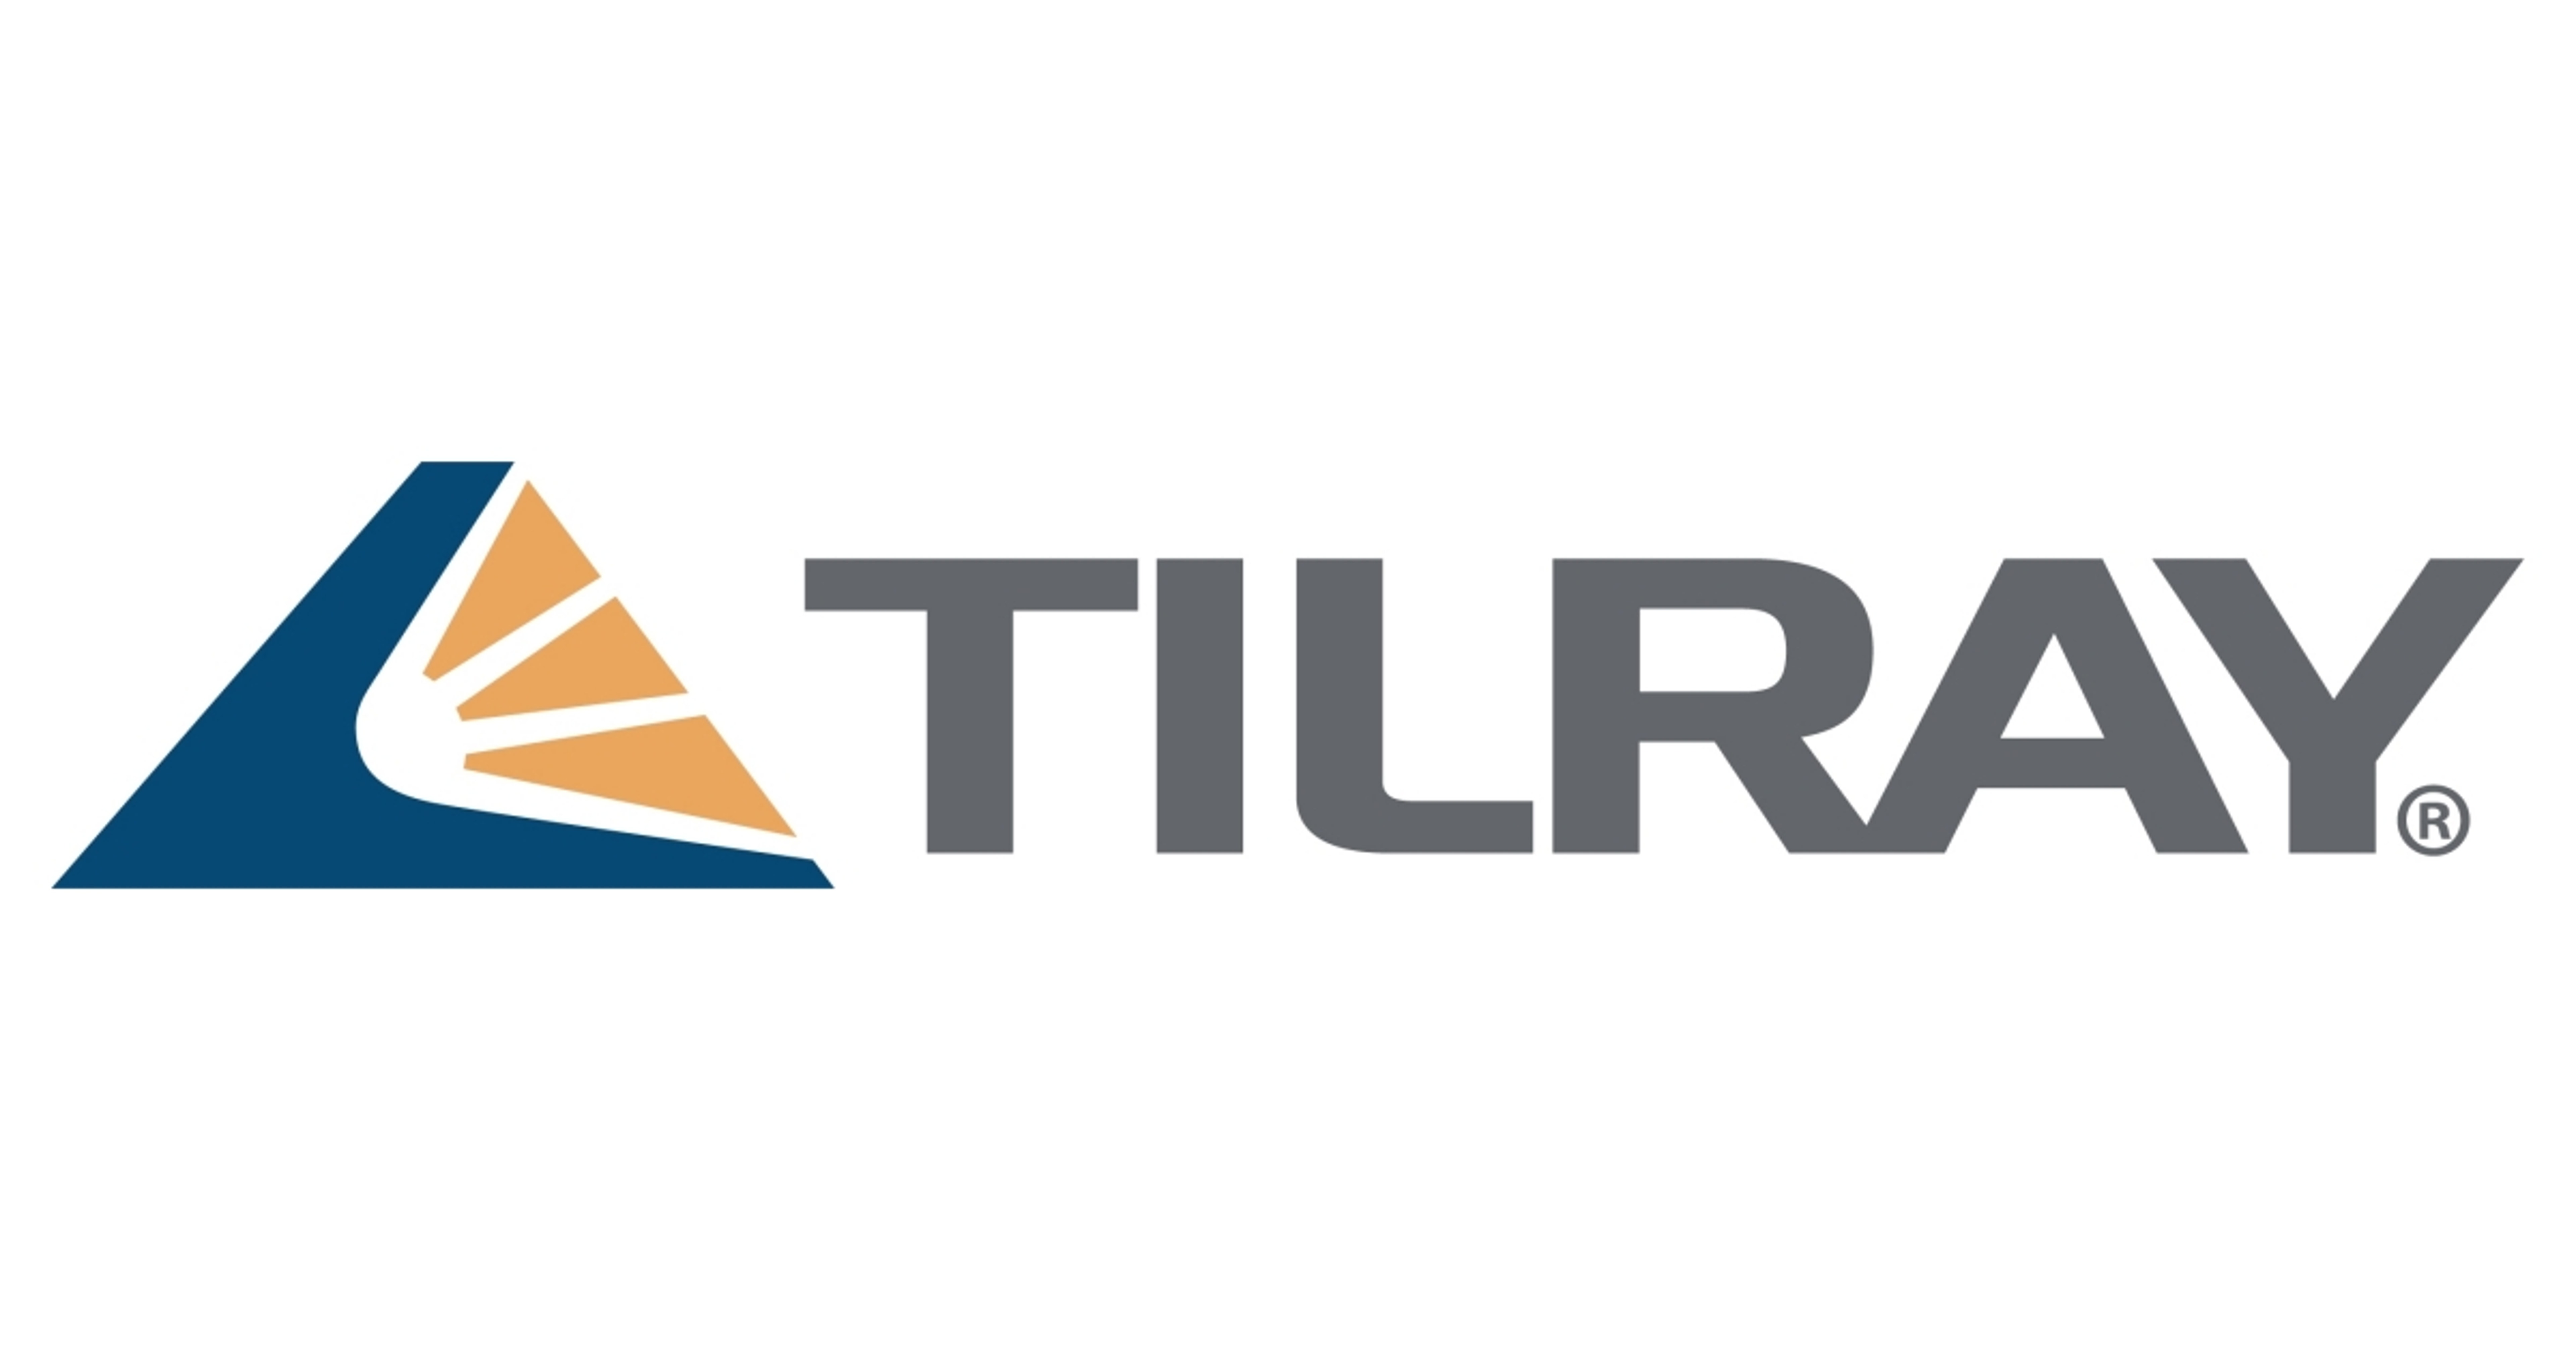 Tilray Stock Soars Then Returns To Earth On Biden&#39;s Cannabis Pardon News, This Analyst Remains Neutral